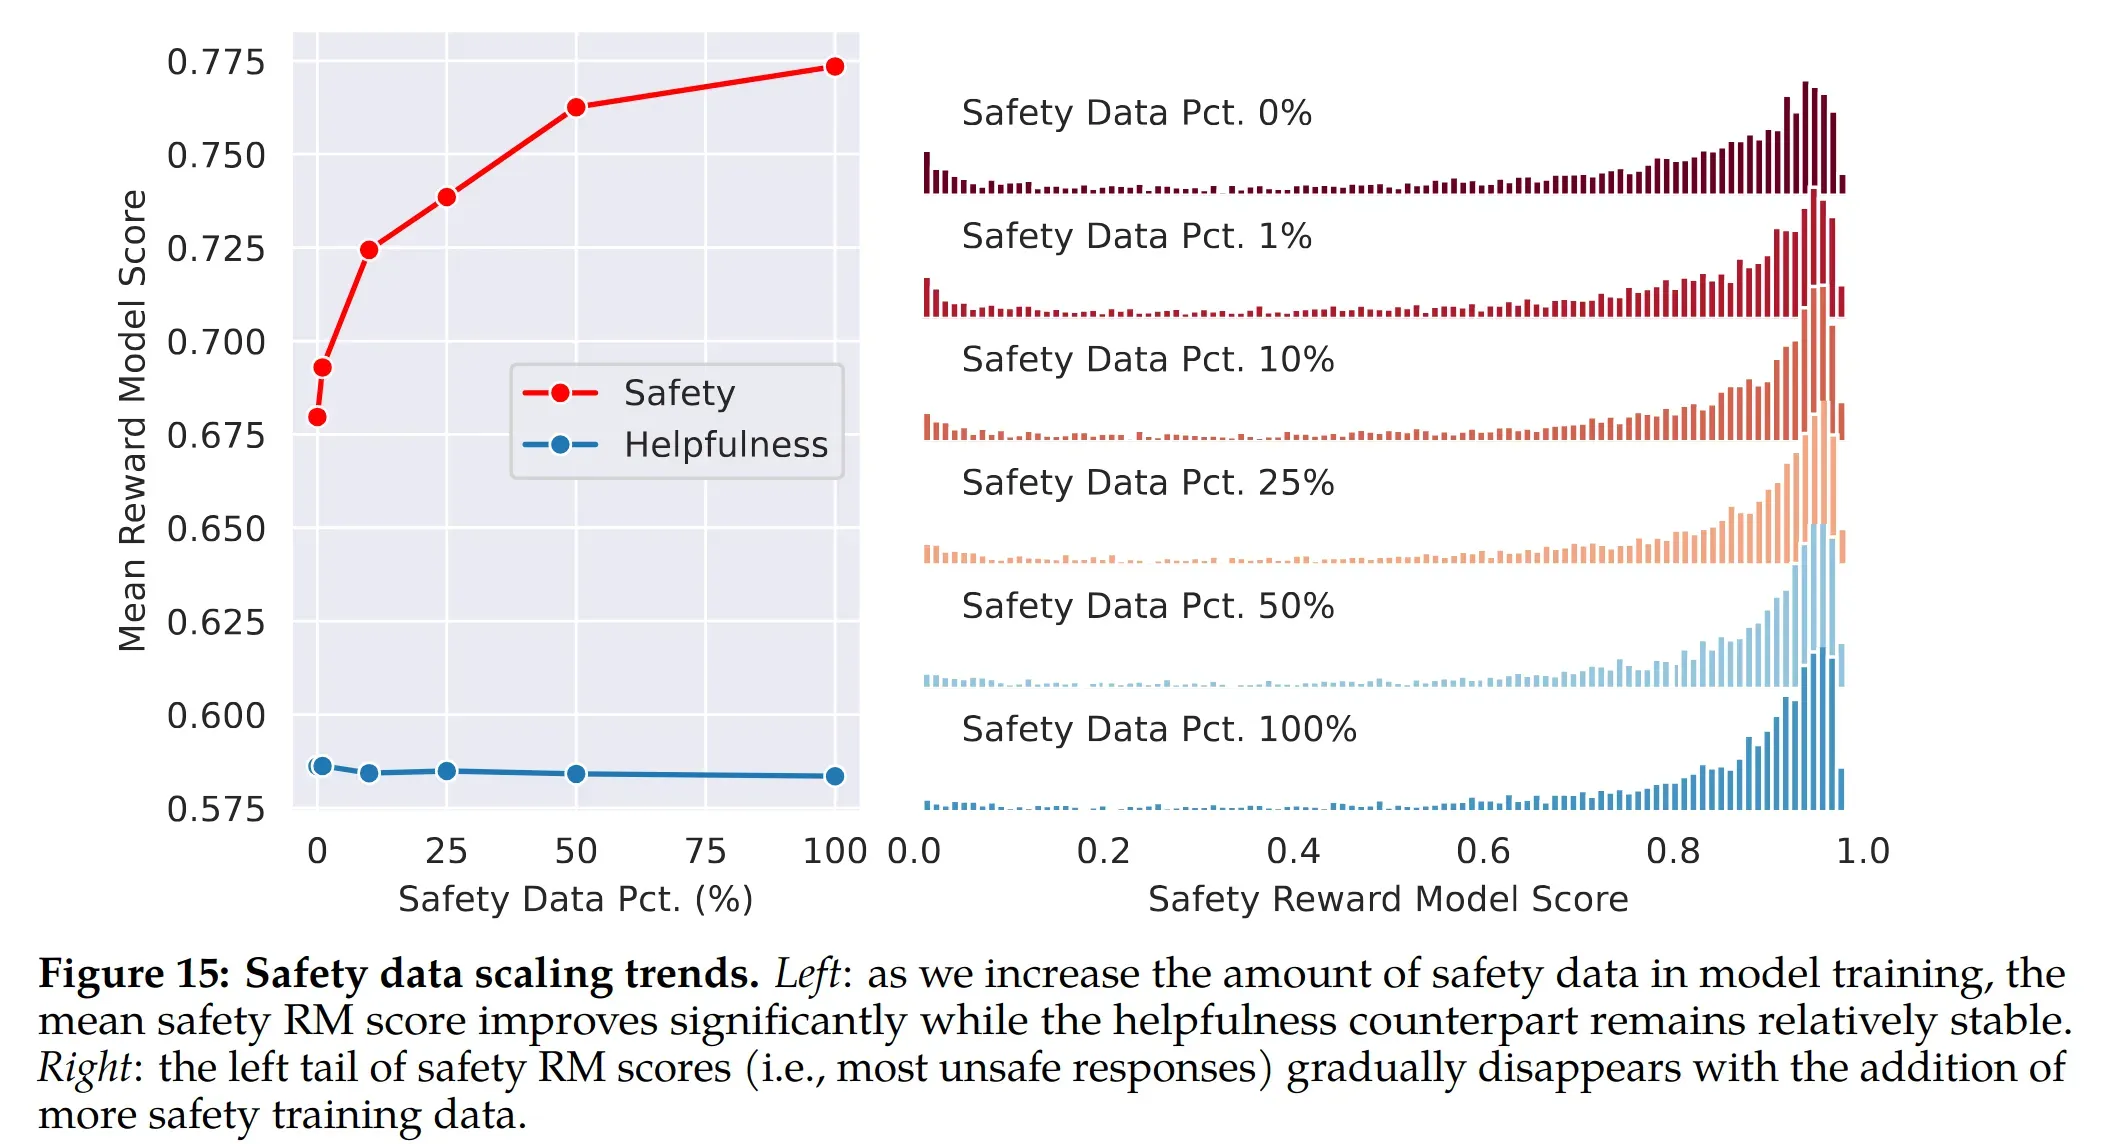 Safety data scaling trends